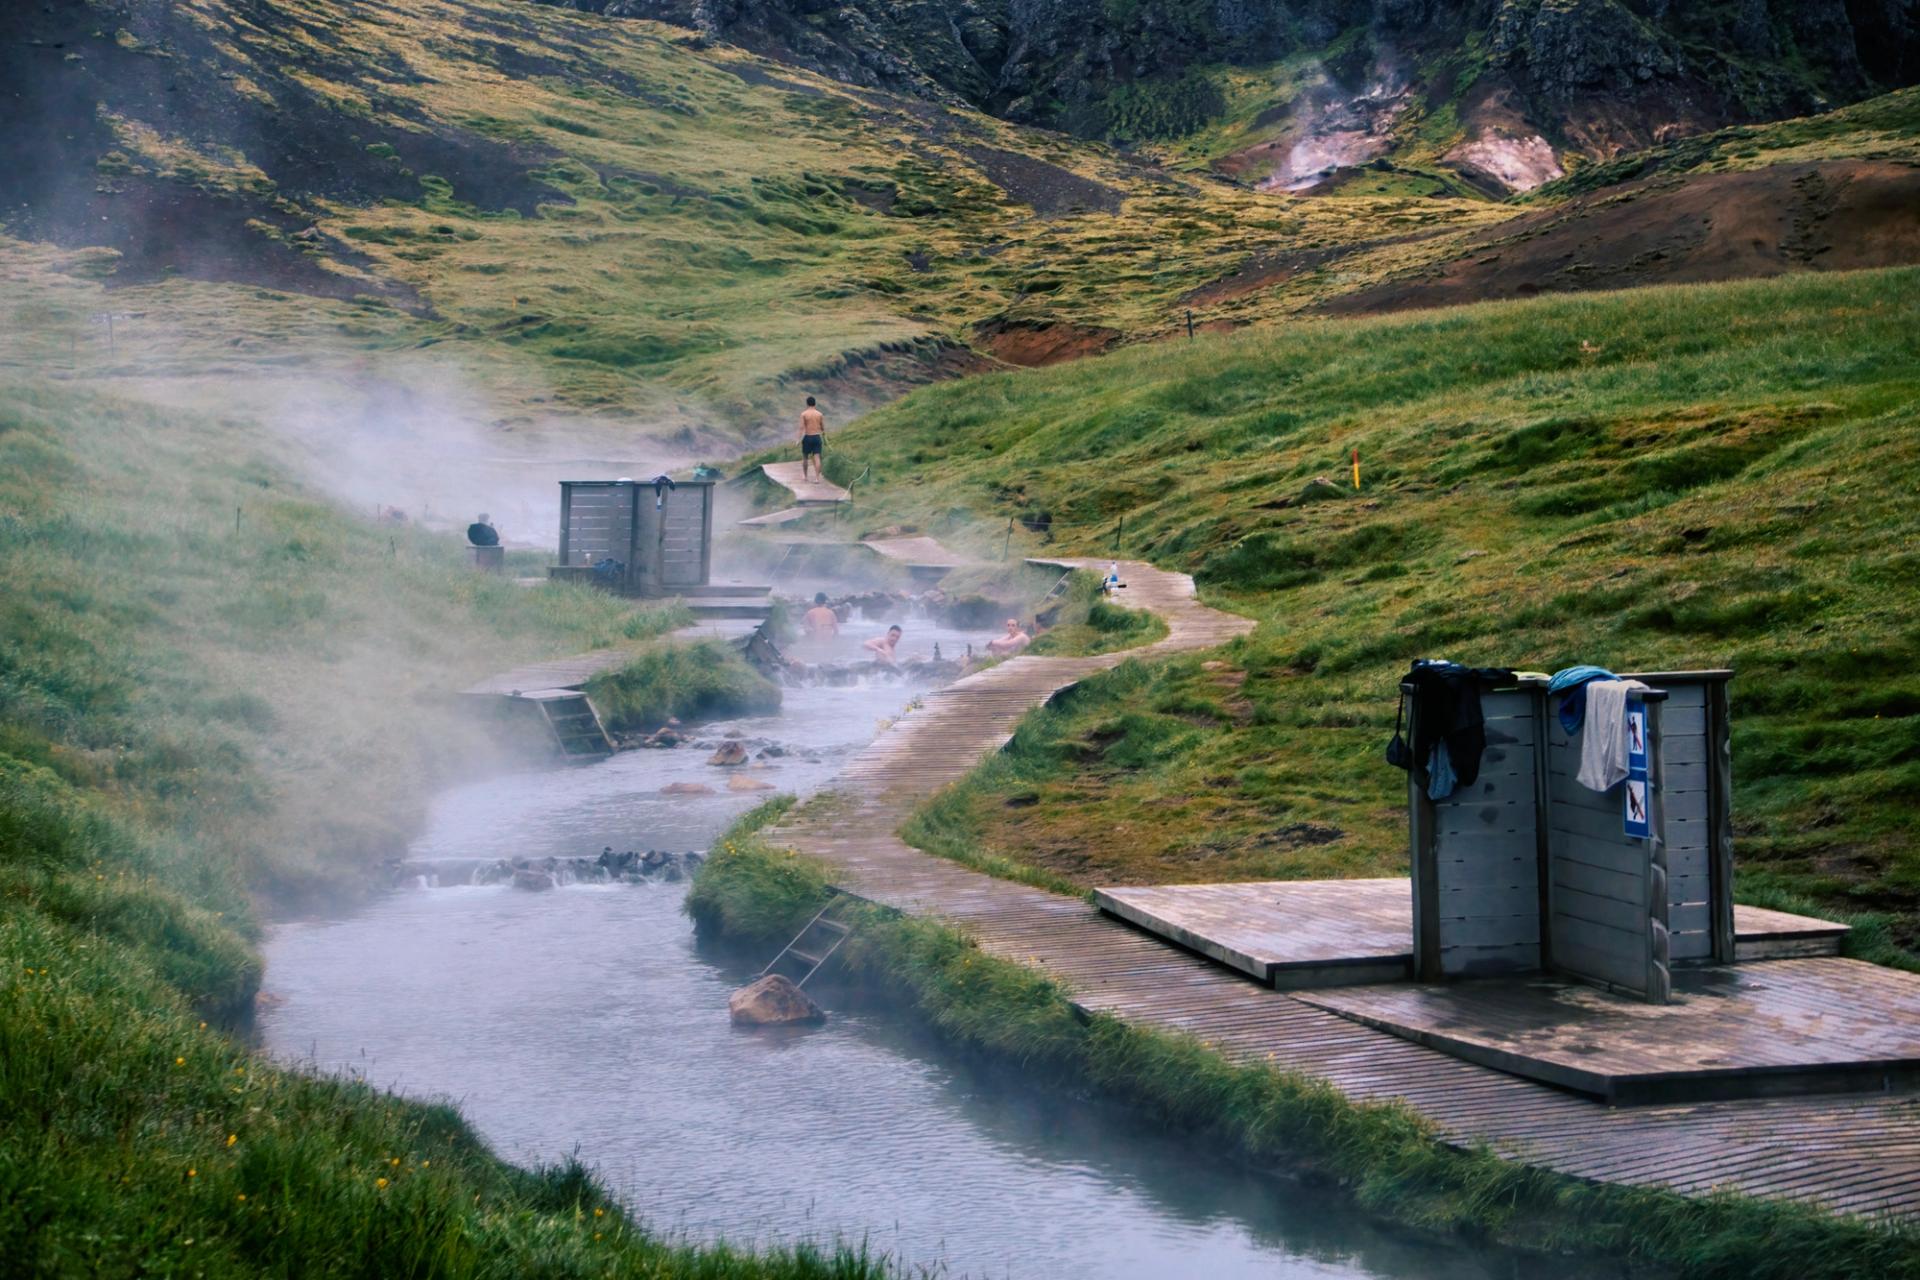 Reykjadalur is a valley with hot springs, located near the town of Hveragerði in Iceland.